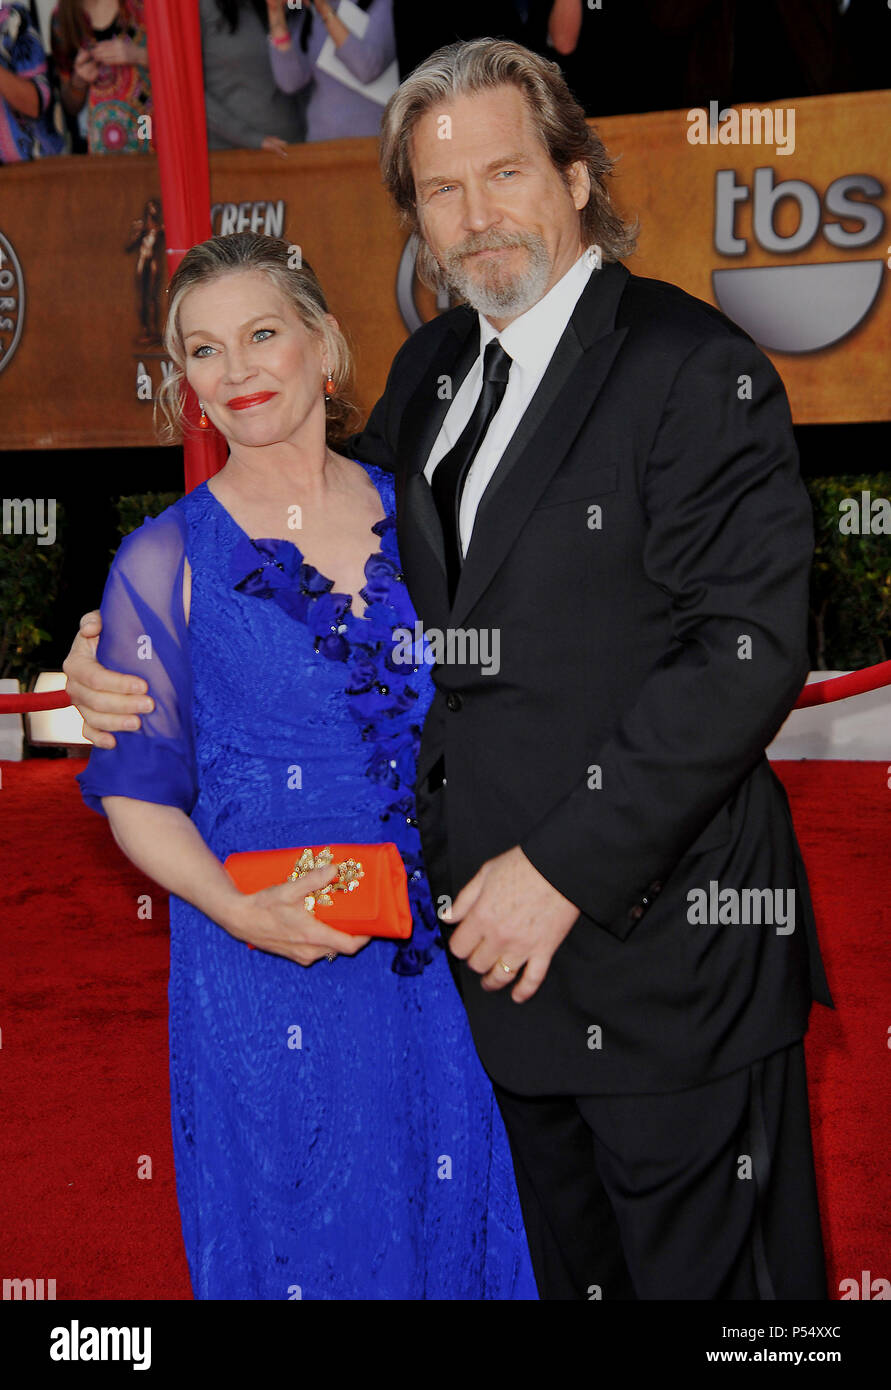 Jeff Bridges Susan Geston  192   - 16 th Annual Screen Actors Guild Awards at the Shrine Auditorium in Los Angeles.Jeff Bridges Susan Geston  192  Event in Hollywood Life - California, Red Carpet Event, USA, Film Industry, Celebrities, Photography, Bestof, Arts Culture and Entertainment, Celebrities fashion, Best of, Hollywood Life, Event in Hollywood Life - California, Red Carpet and backstage, Music celebrities, Topix, Couple, family ( husband and wife ) and kids- Children, brothers and sisters inquiry tsuni@Gamma-USA.com, Credit Tsuni / USA, 2010 Stock Photo